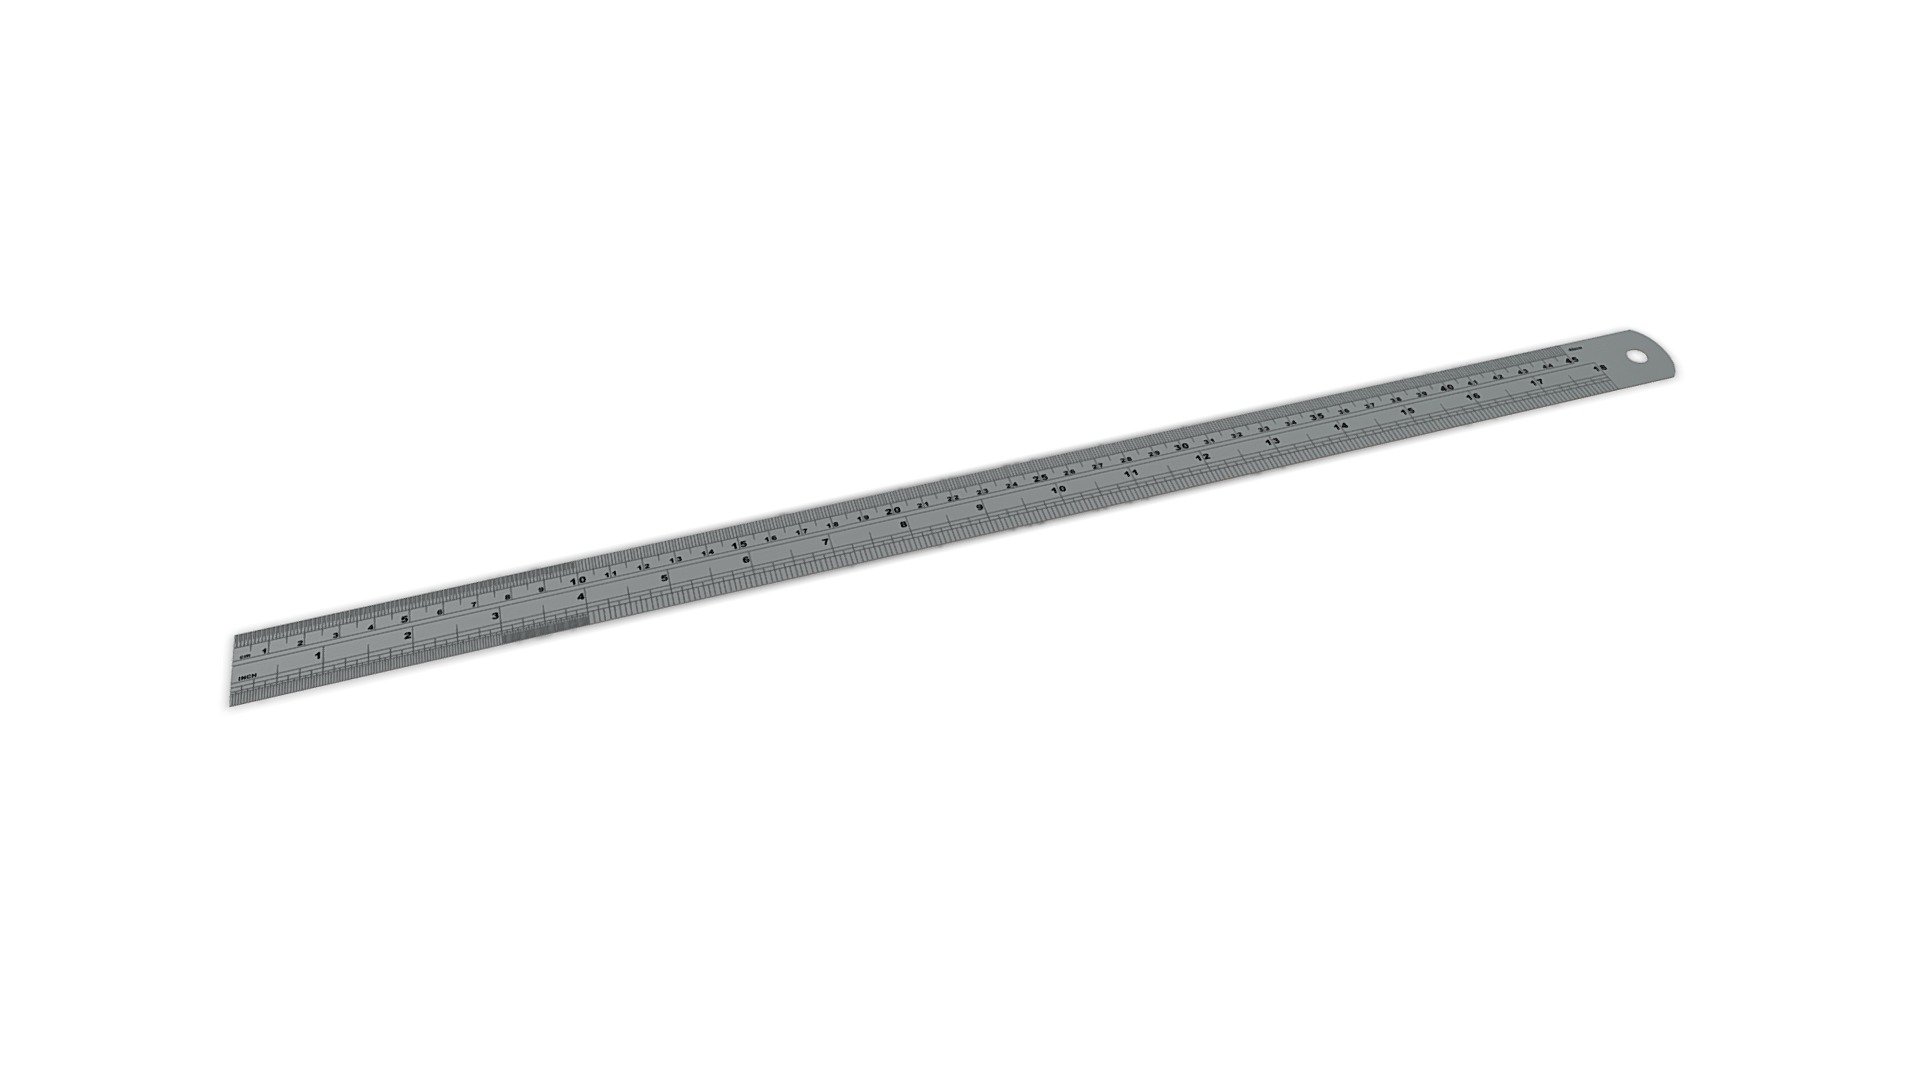 A high-quality stainless steel ruler. Real world scale with sub-millimetre precision. Measures up to 45cm or 18in.
Created in Blender. .blend file has textures packed (embedded in the file). Download textures.zip to use textures in other model formats.

Geometry:




Quads and tris

Not subdividable

Smooth shading with custom edge normal data

Modelled to real-world scale, units: metres

Mesh is watertight, manifold, and faces are planar.

Texturing:




PBR textures, Color, normal, specular, roughness.

4096x4096 resolution (4K)

png format

Entirely UV mapped with no overlap.
 - Steel Ruler - Buy Royalty Free 3D model by Martin Ibbett (@unyxium) 3d model